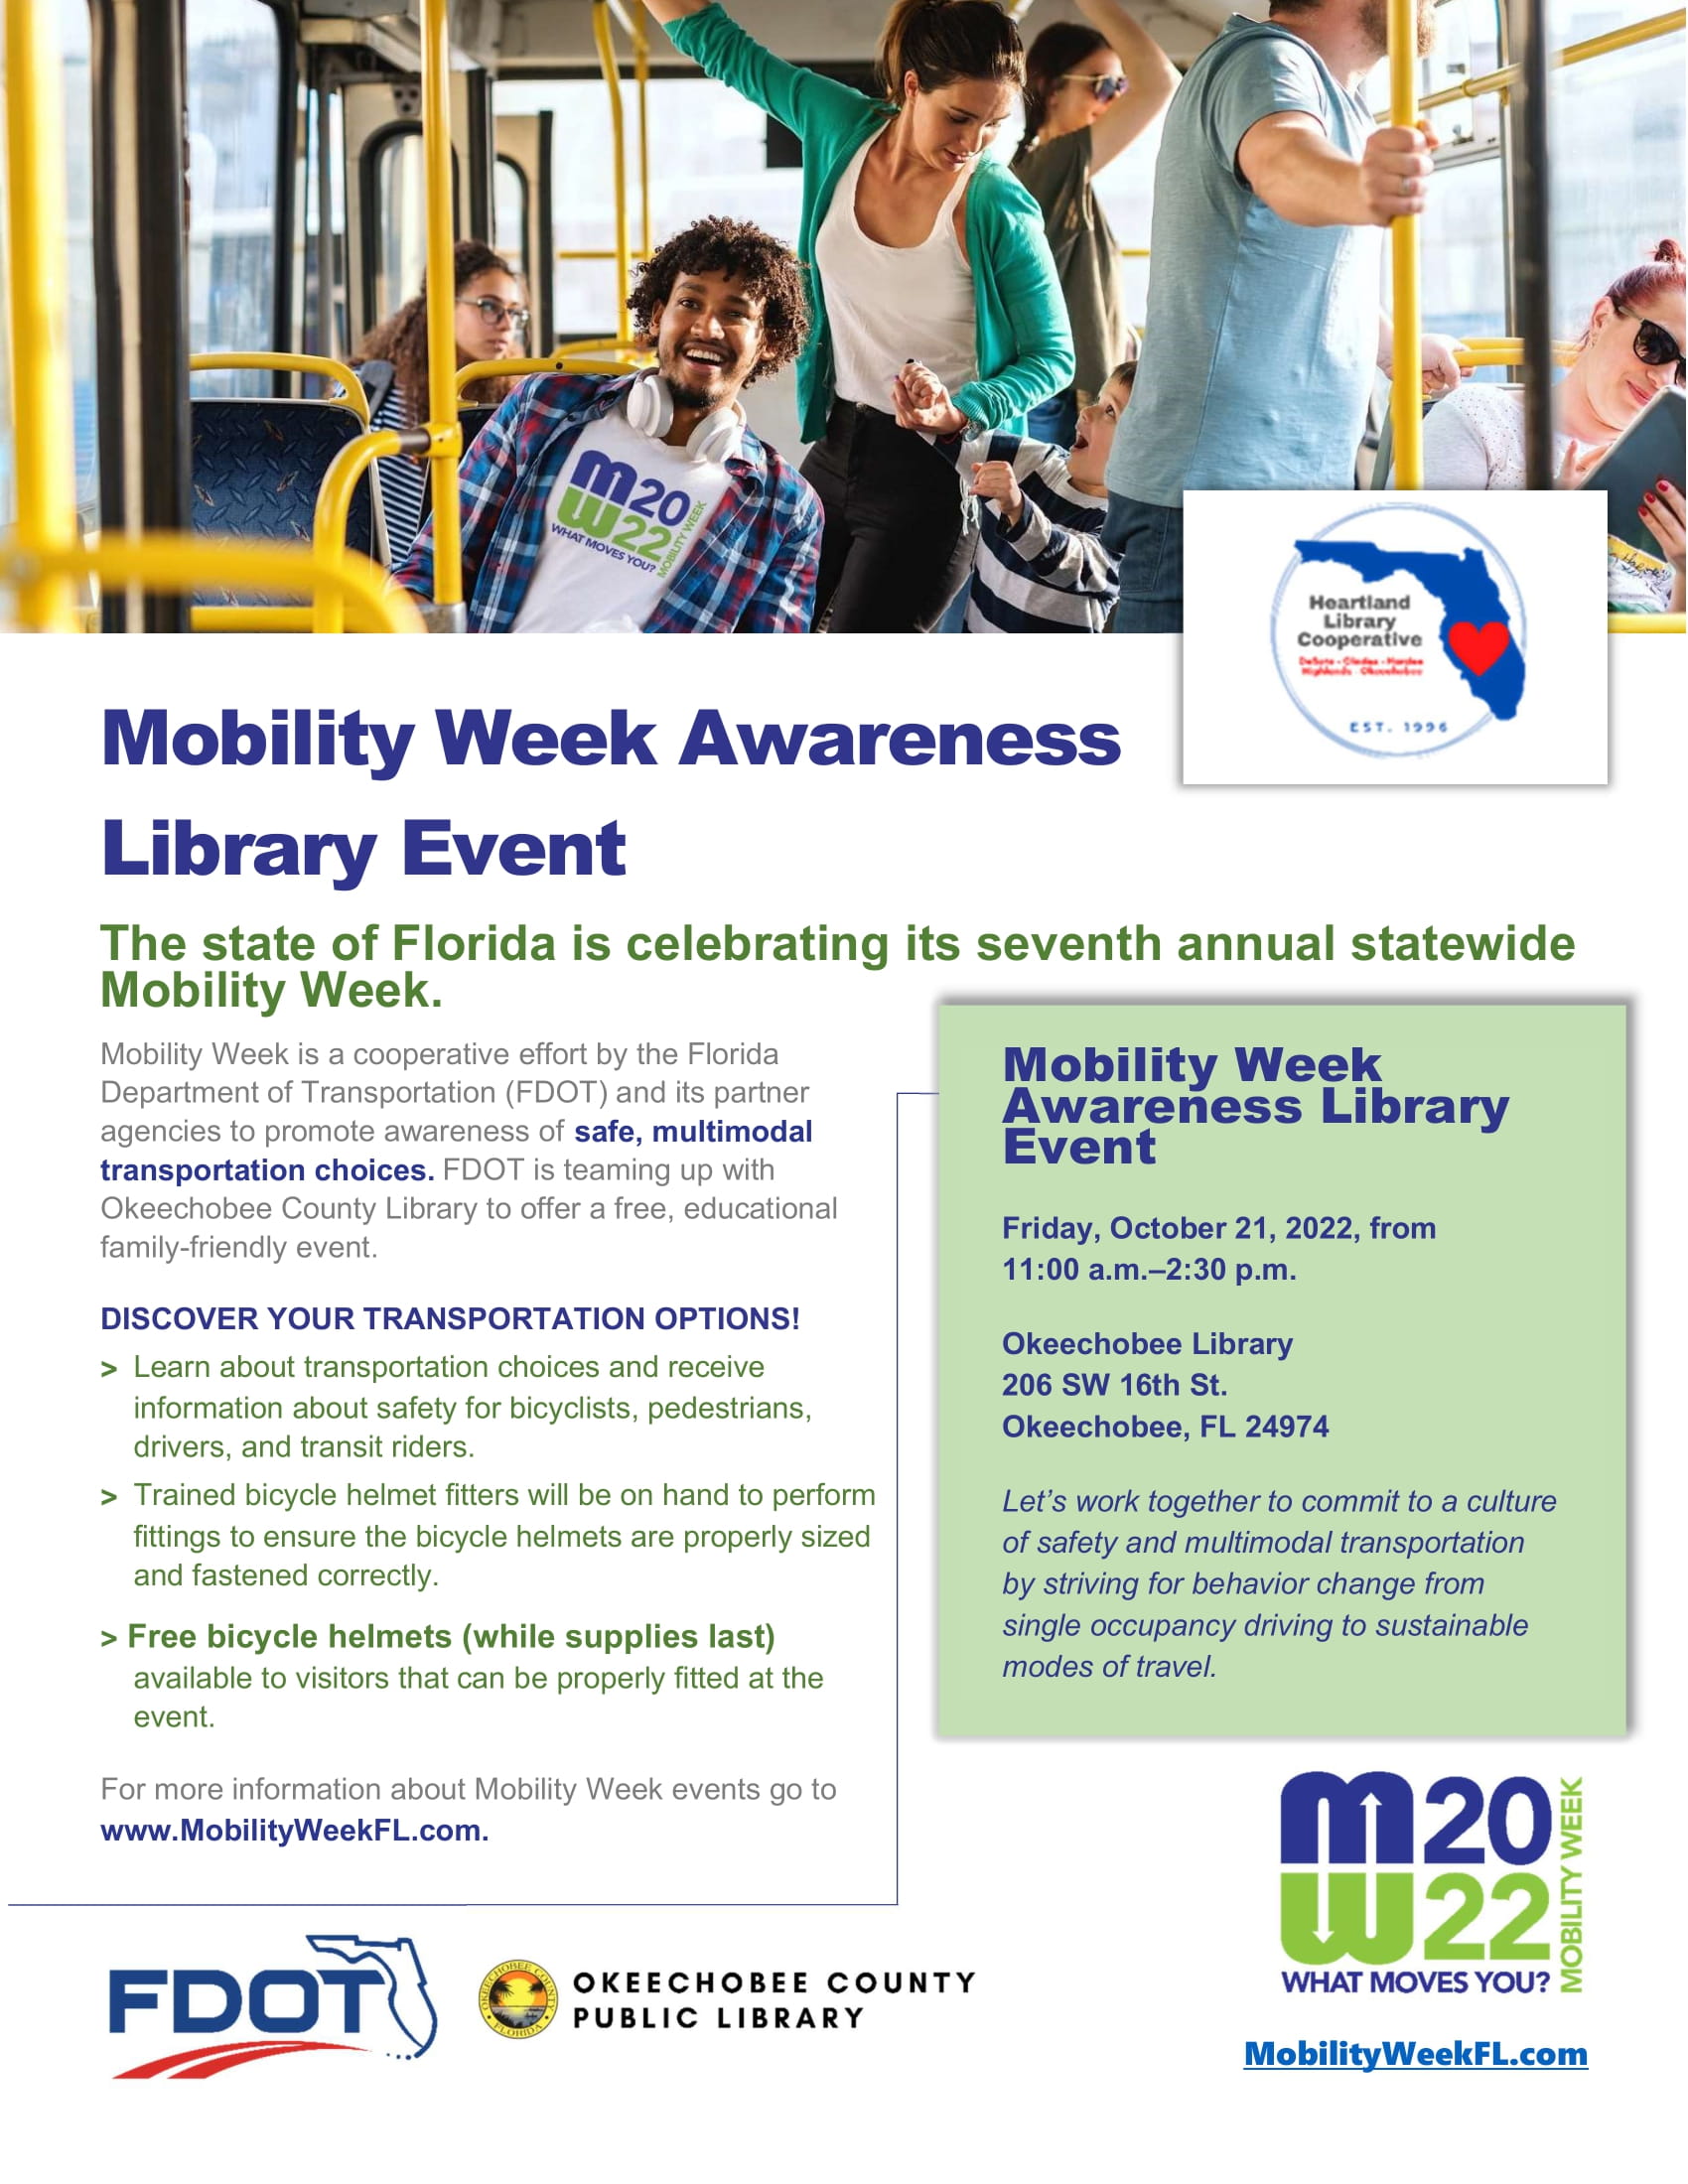 The Florida Department of Transportation will be hosting a Mobility Week Awareness event at the Okeechobee Library on Saturday, October 22nd from 11:00 a.m. - 2:30 p.m.!"